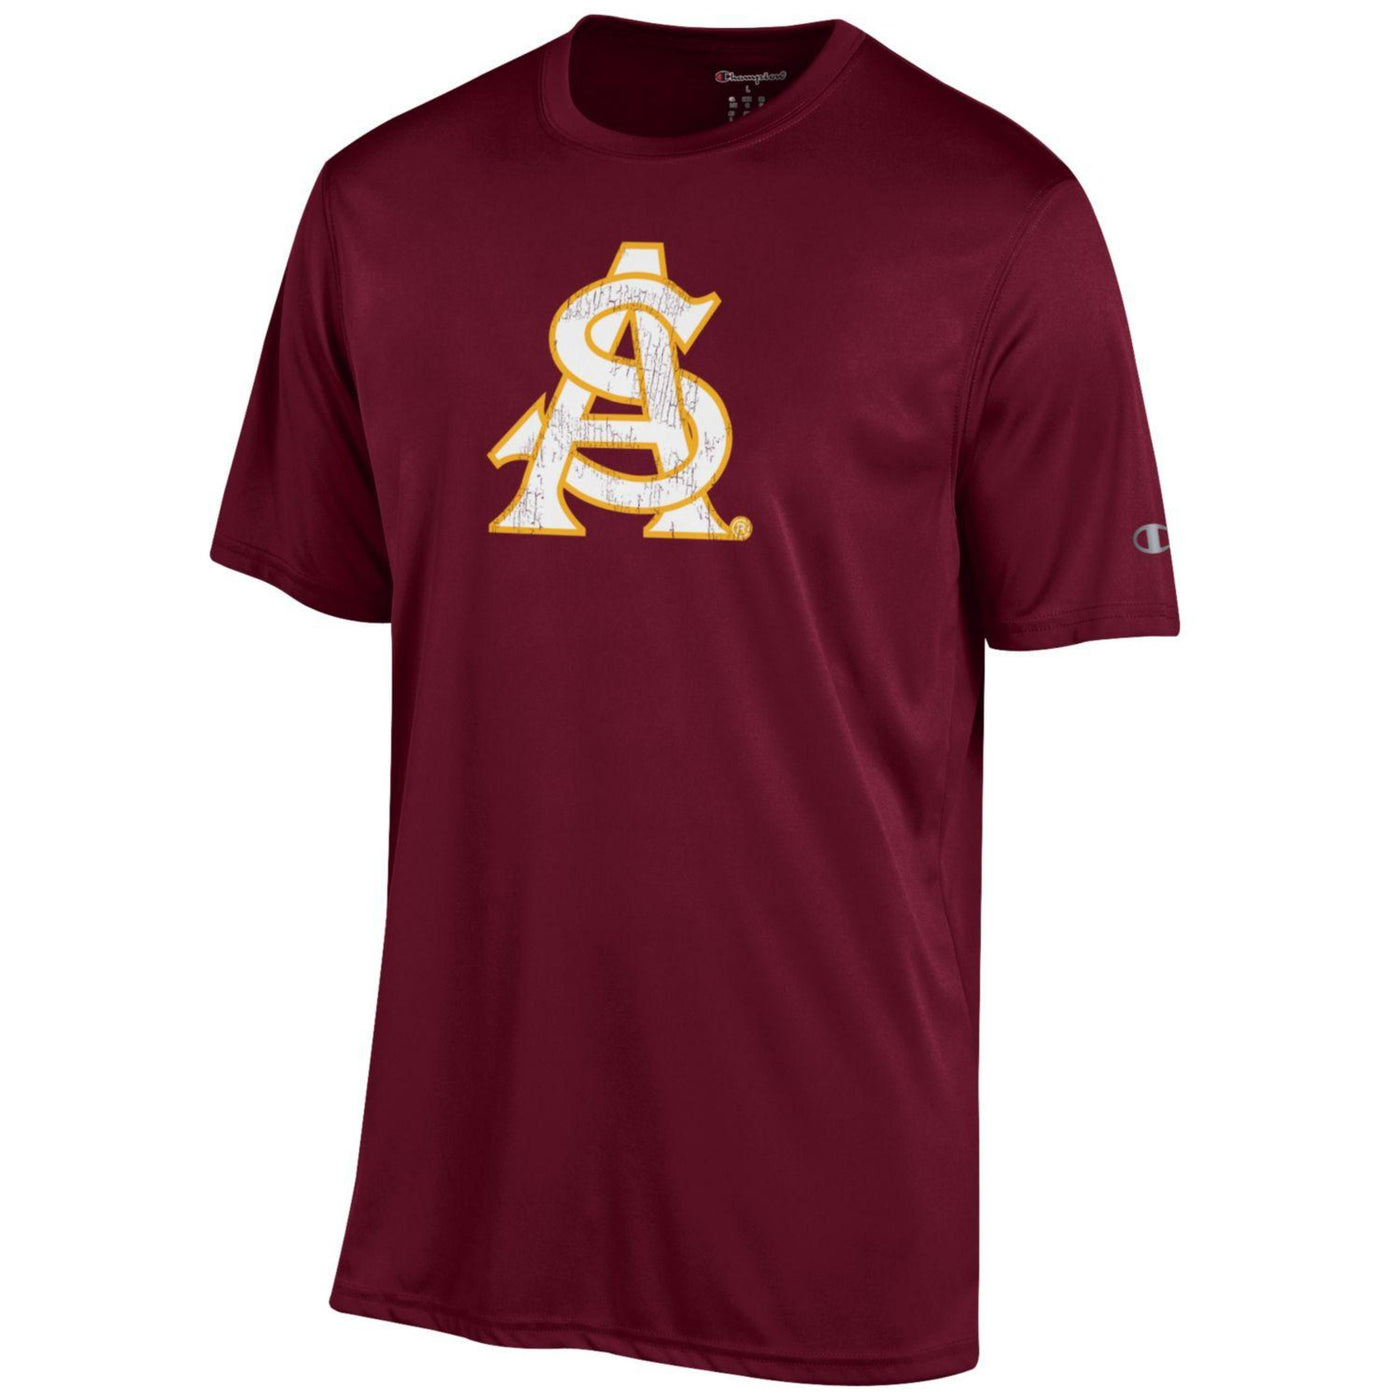 ASU maroon athletic tee with a white and gold interlocking 'A' and 'S' symbol on the chest